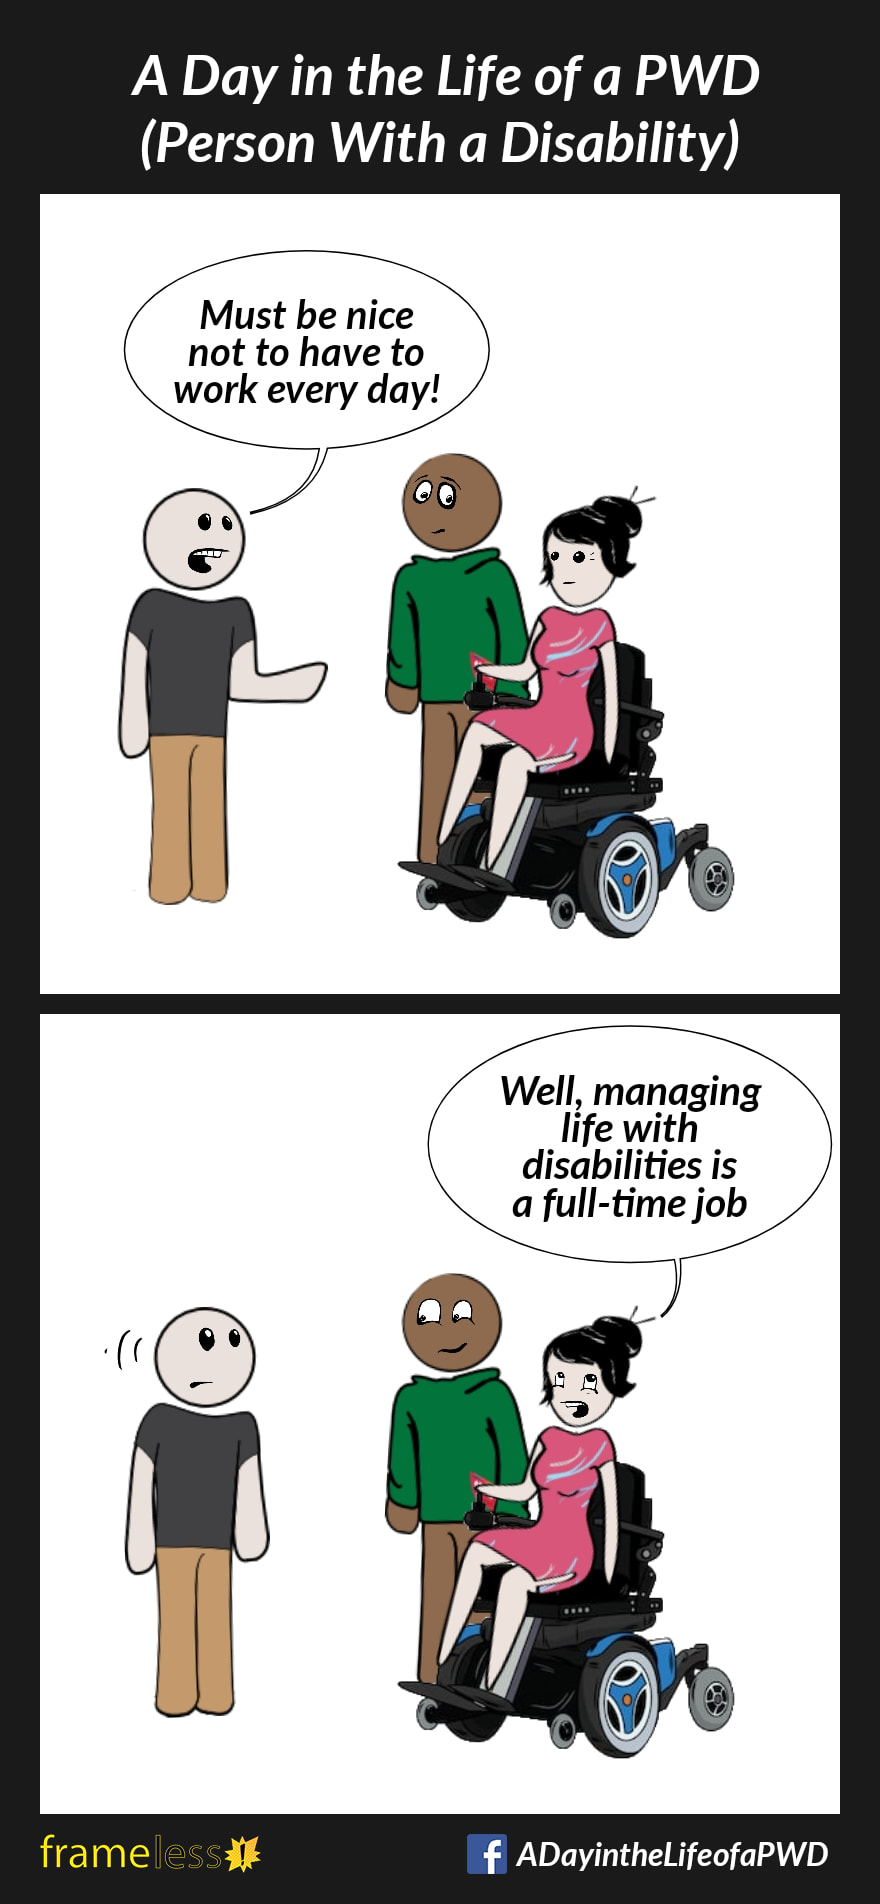 COMIC STRIP 
A Day in the Life of a PWD (Person With a Disability) 

Frame 1:
A woman in a power wheelchair and her partner are chatting with an acquaintance. 
ACQUAINTANCE: Must be nice not to have to work every day!

Frame 2:
WOMAN (rolling her eyes): Well, managing life with disabilities is a full-time job 